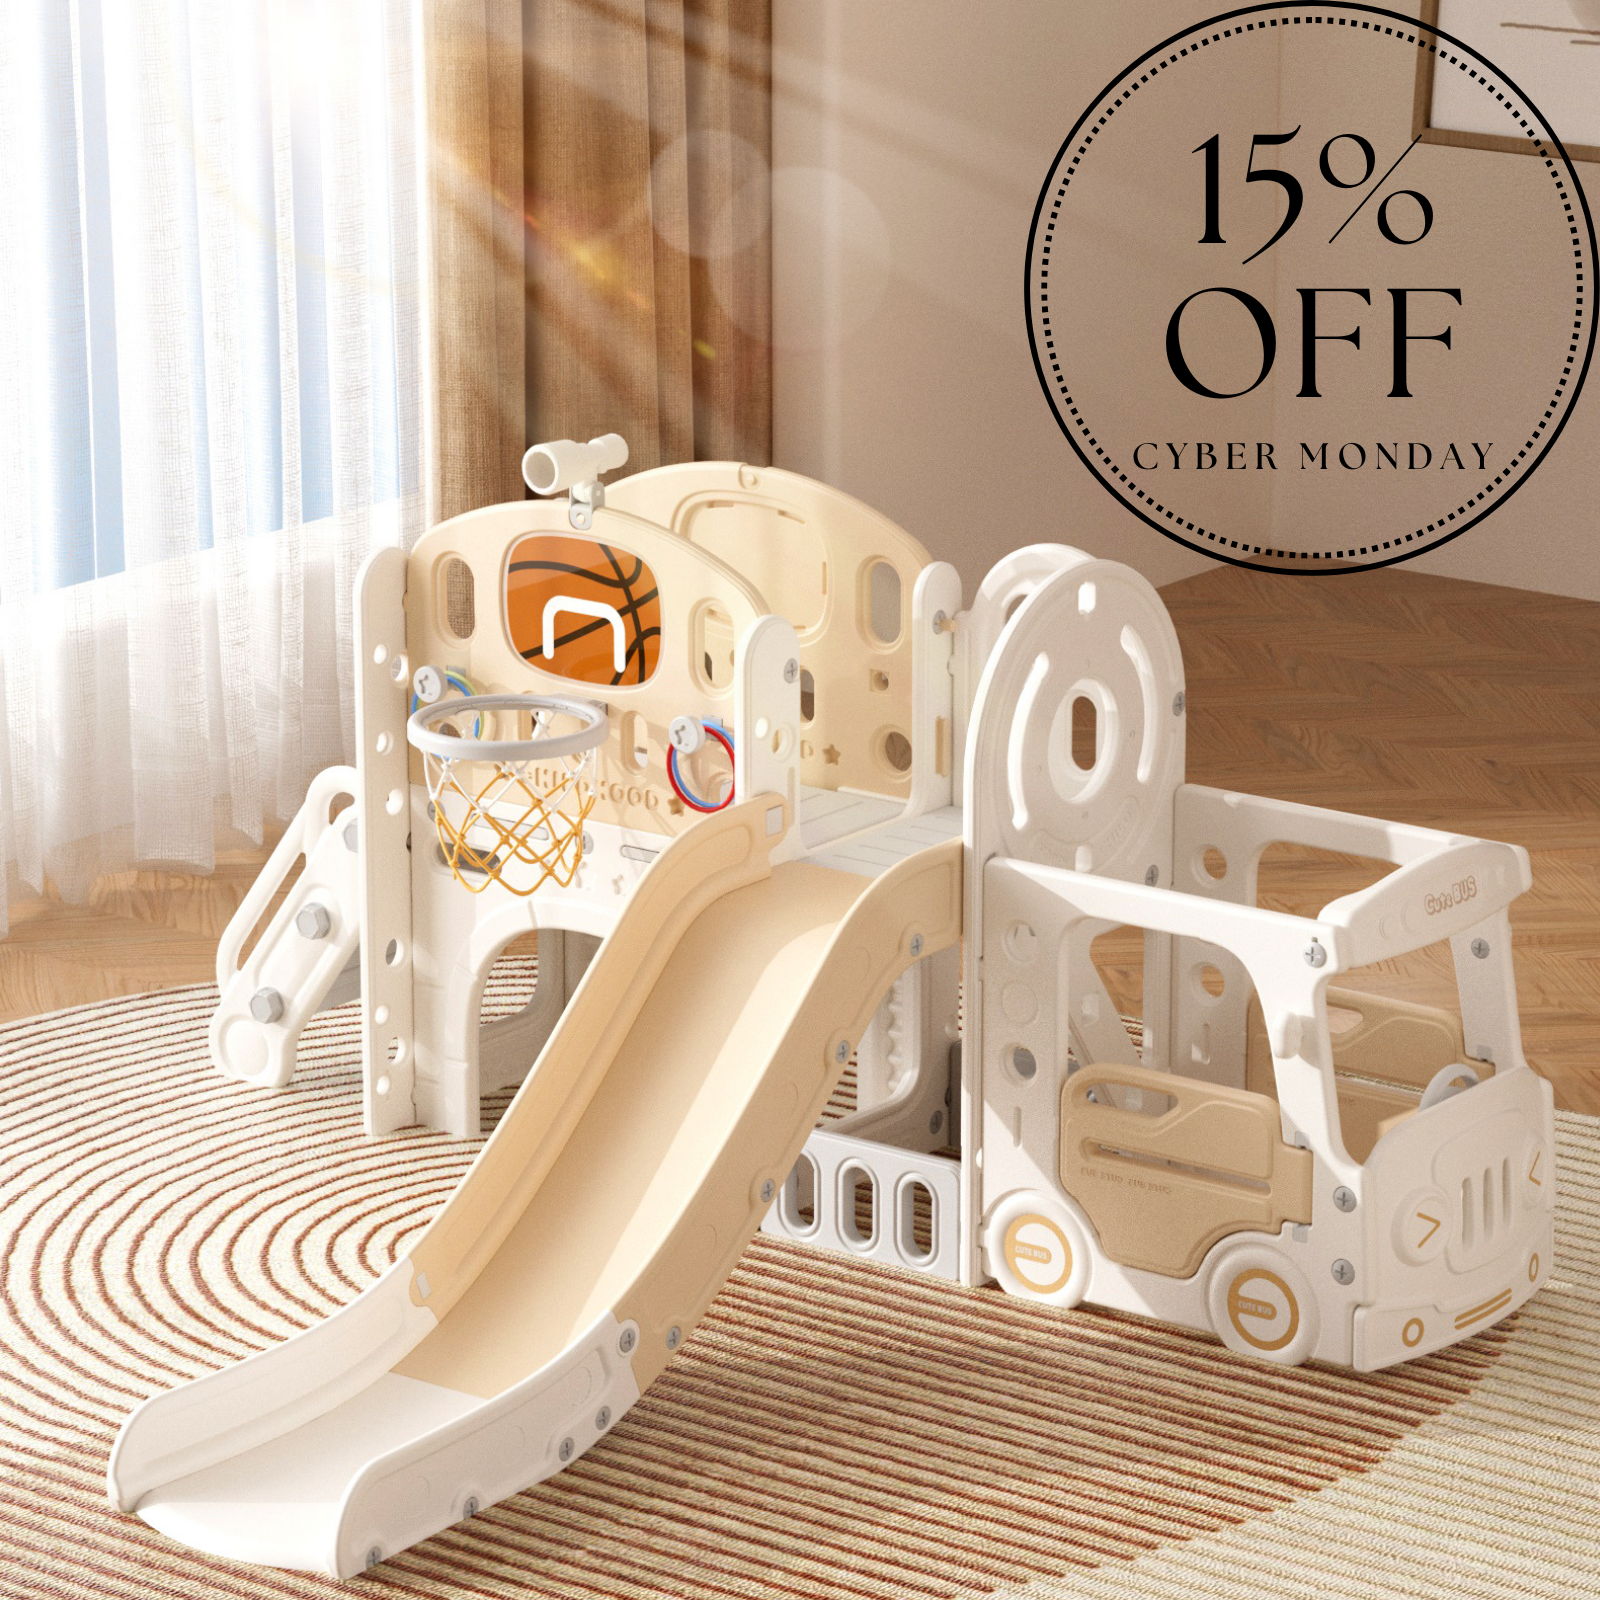 Cyber Monday Extravaganza: Dive into Joy with 15% Off on Our Popular Kids Toys!